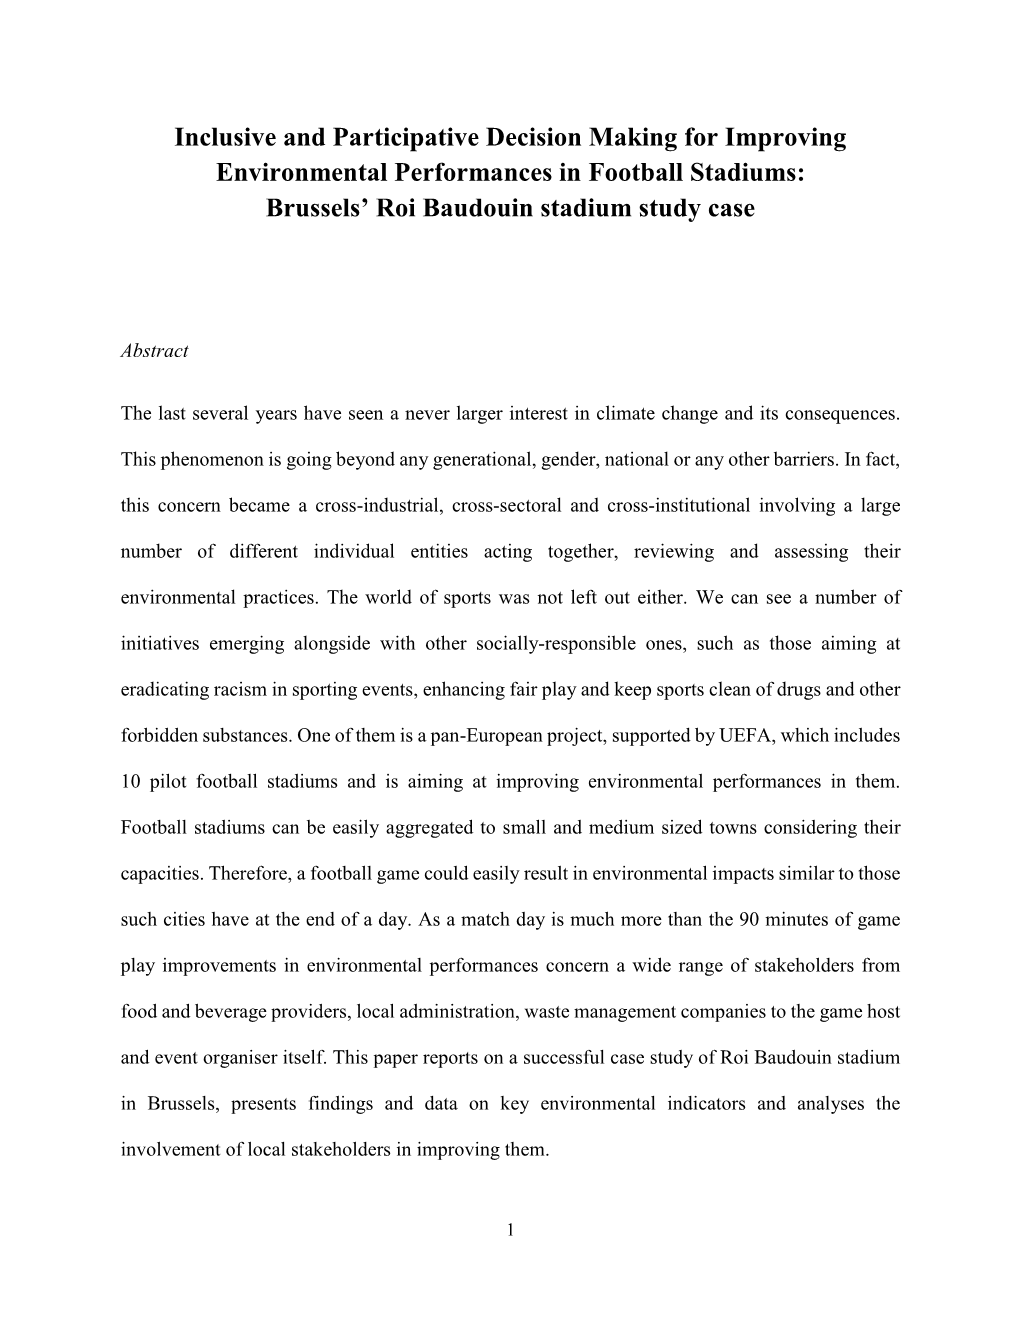 Inclusive and Participative Decision Making for Improving Environmental Performances in Football Stadiums: Brussels’ Roi Baudouin Stadium Study Case